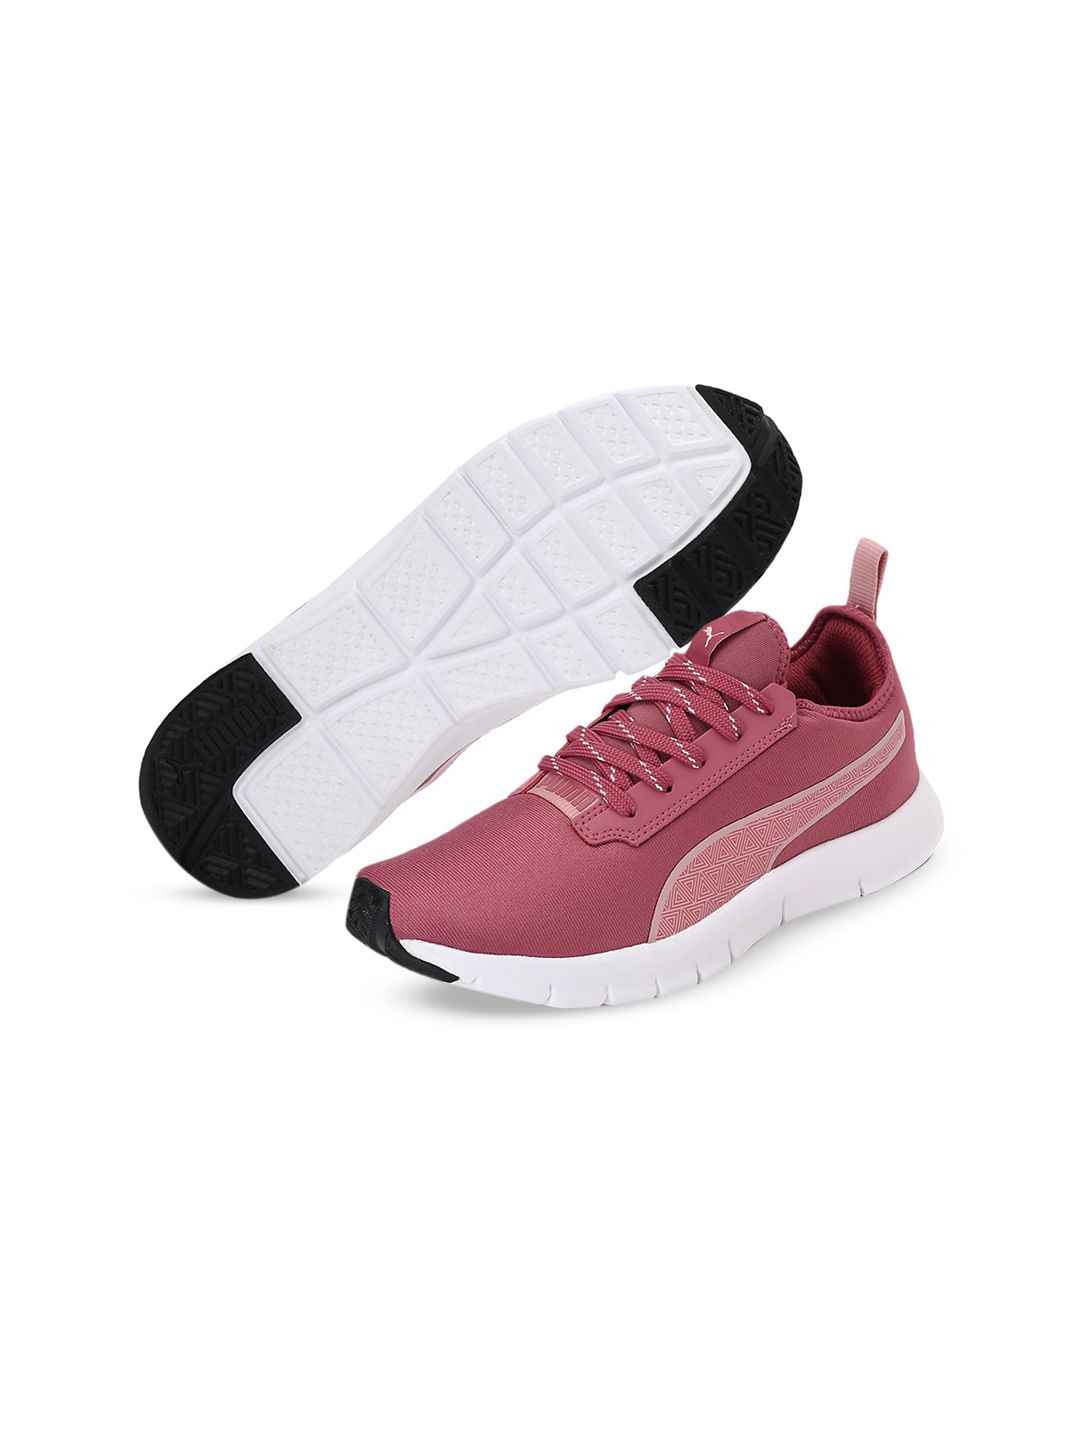 Puma Women Pink & White Colourblocked Sneakers Price in India